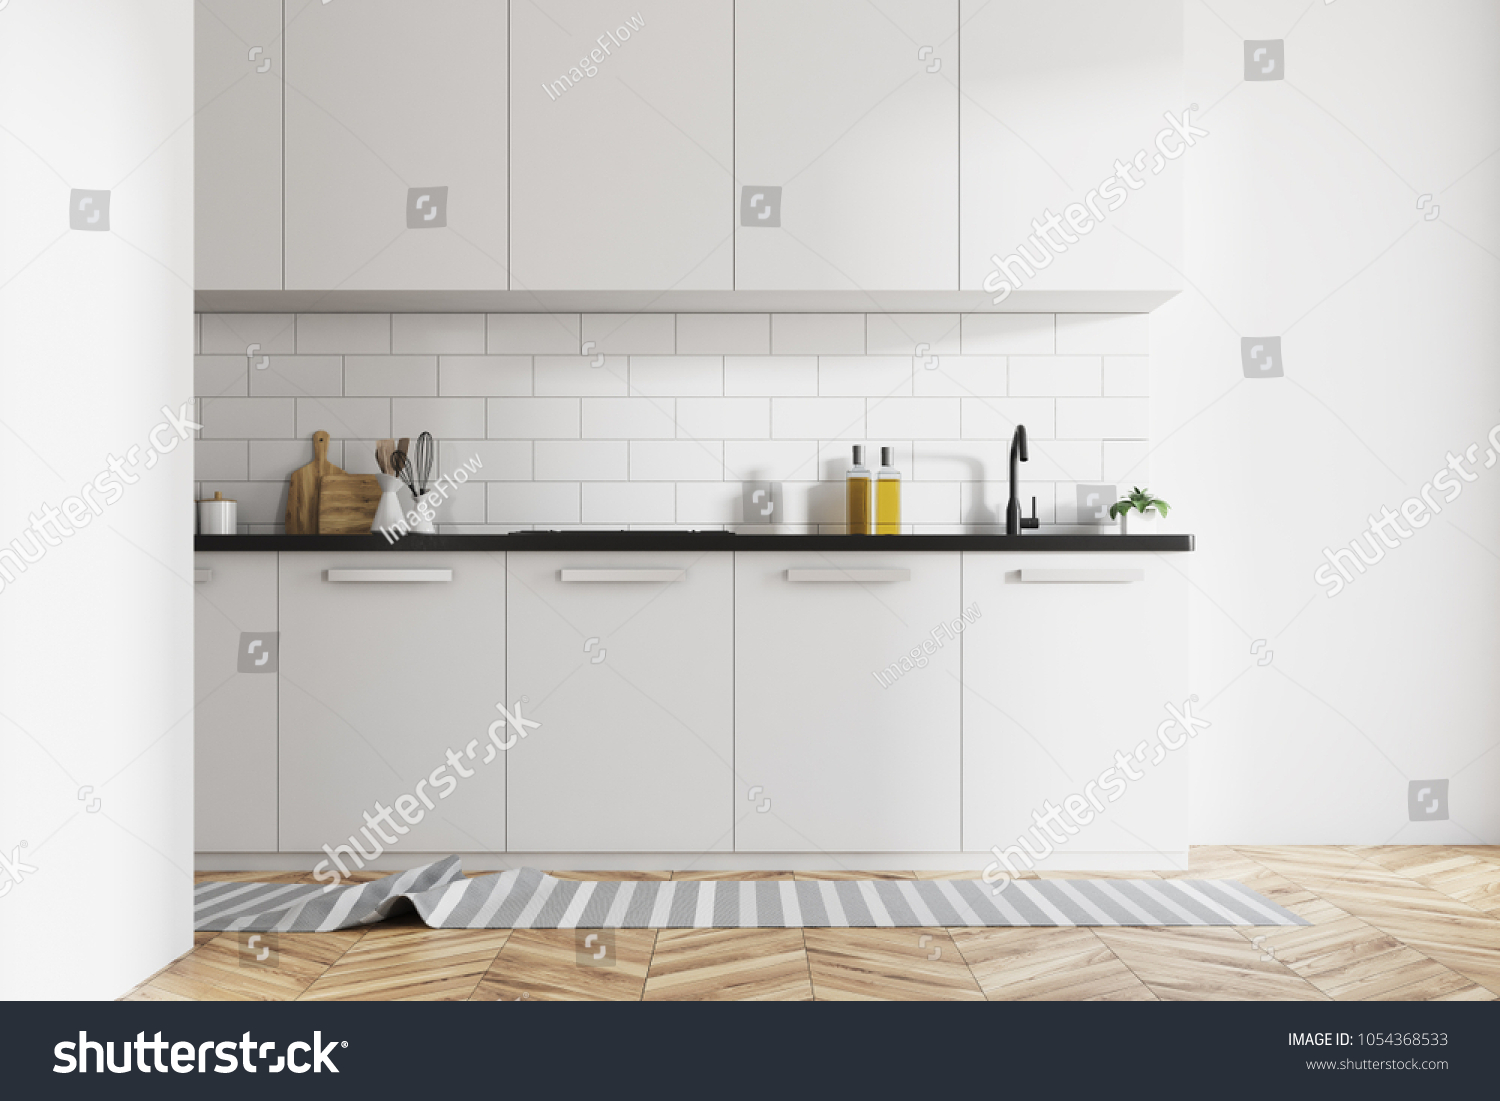 Stock Photo Modern Kitchen Interior With White Brick Walls White Countertops And A Wooden Floor With A Rag On 1054368533 